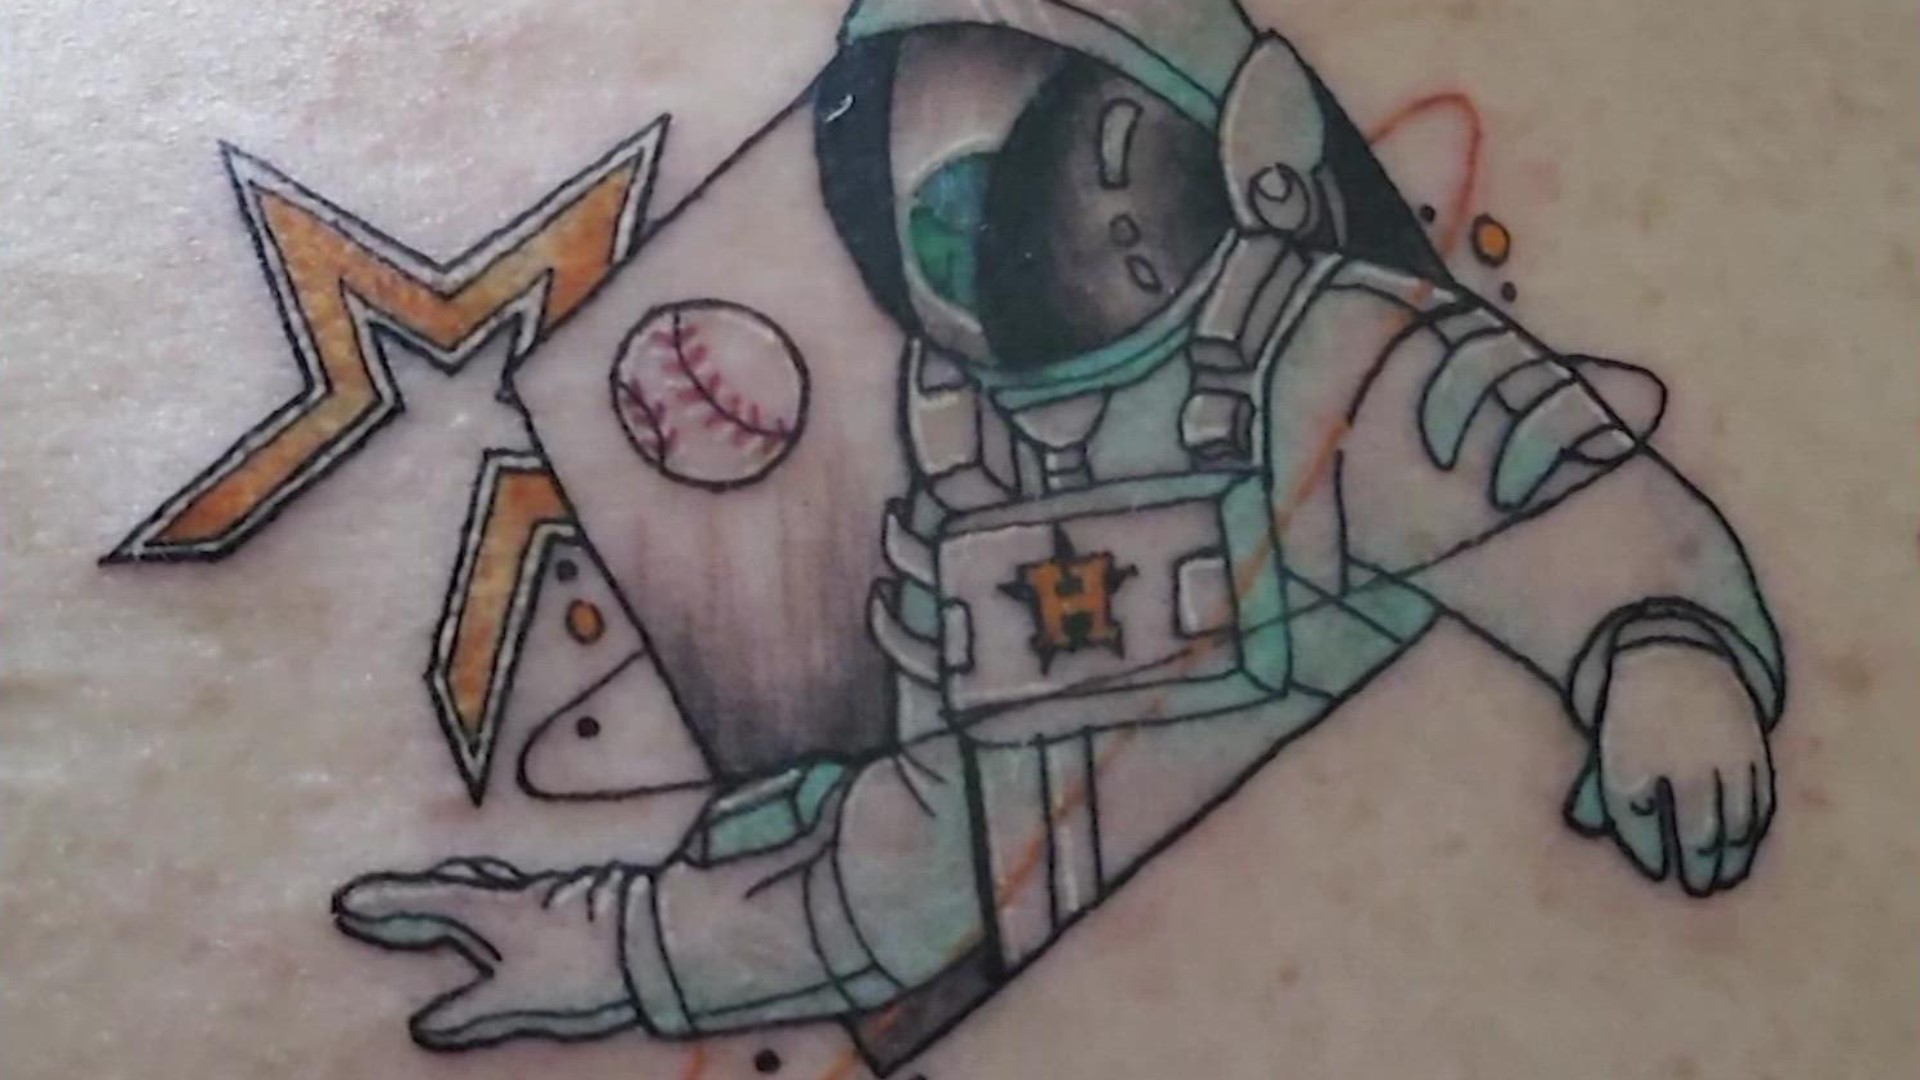 Astros fans have gotten creative when it comes to permanent ink memorializing the team and its accomplishments.